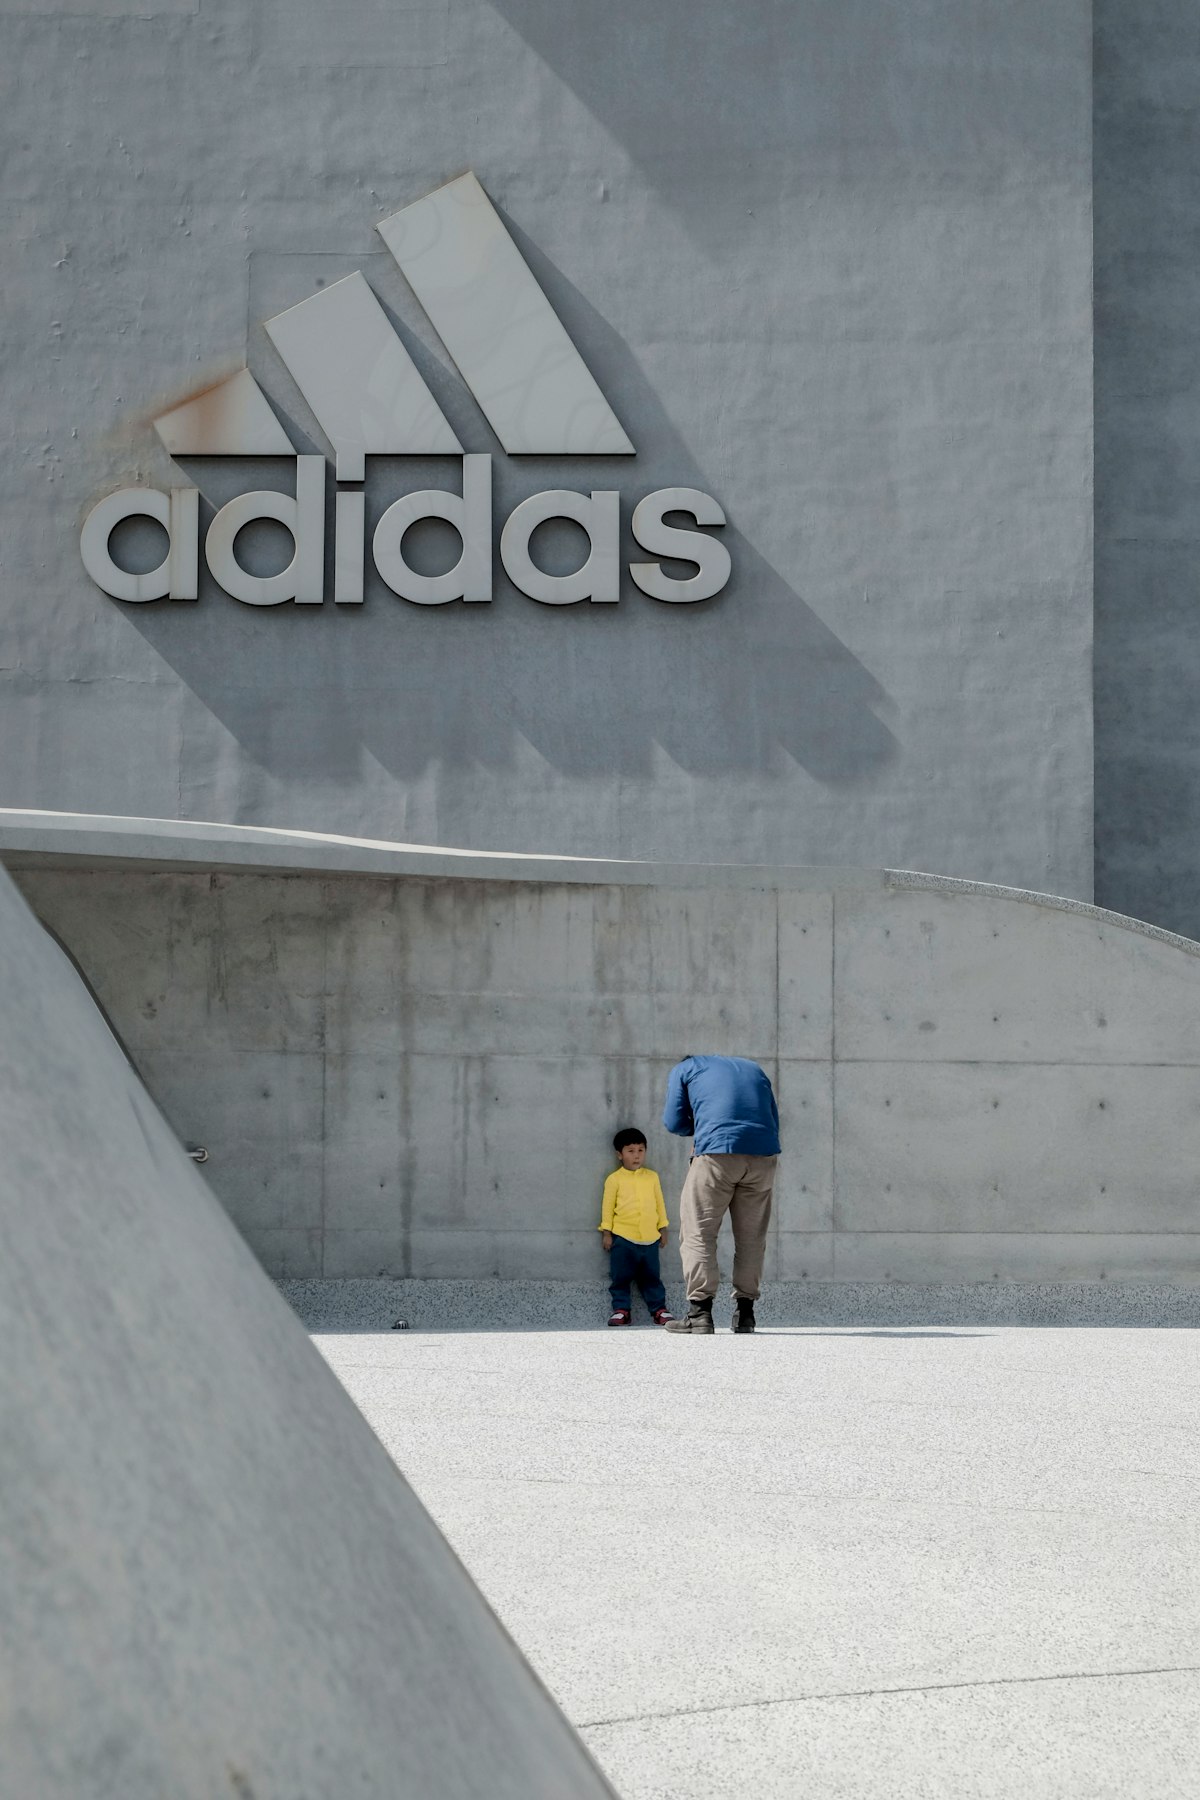 What You Need to Know About Adidas Originals’ Move into NFTs and Metaverse